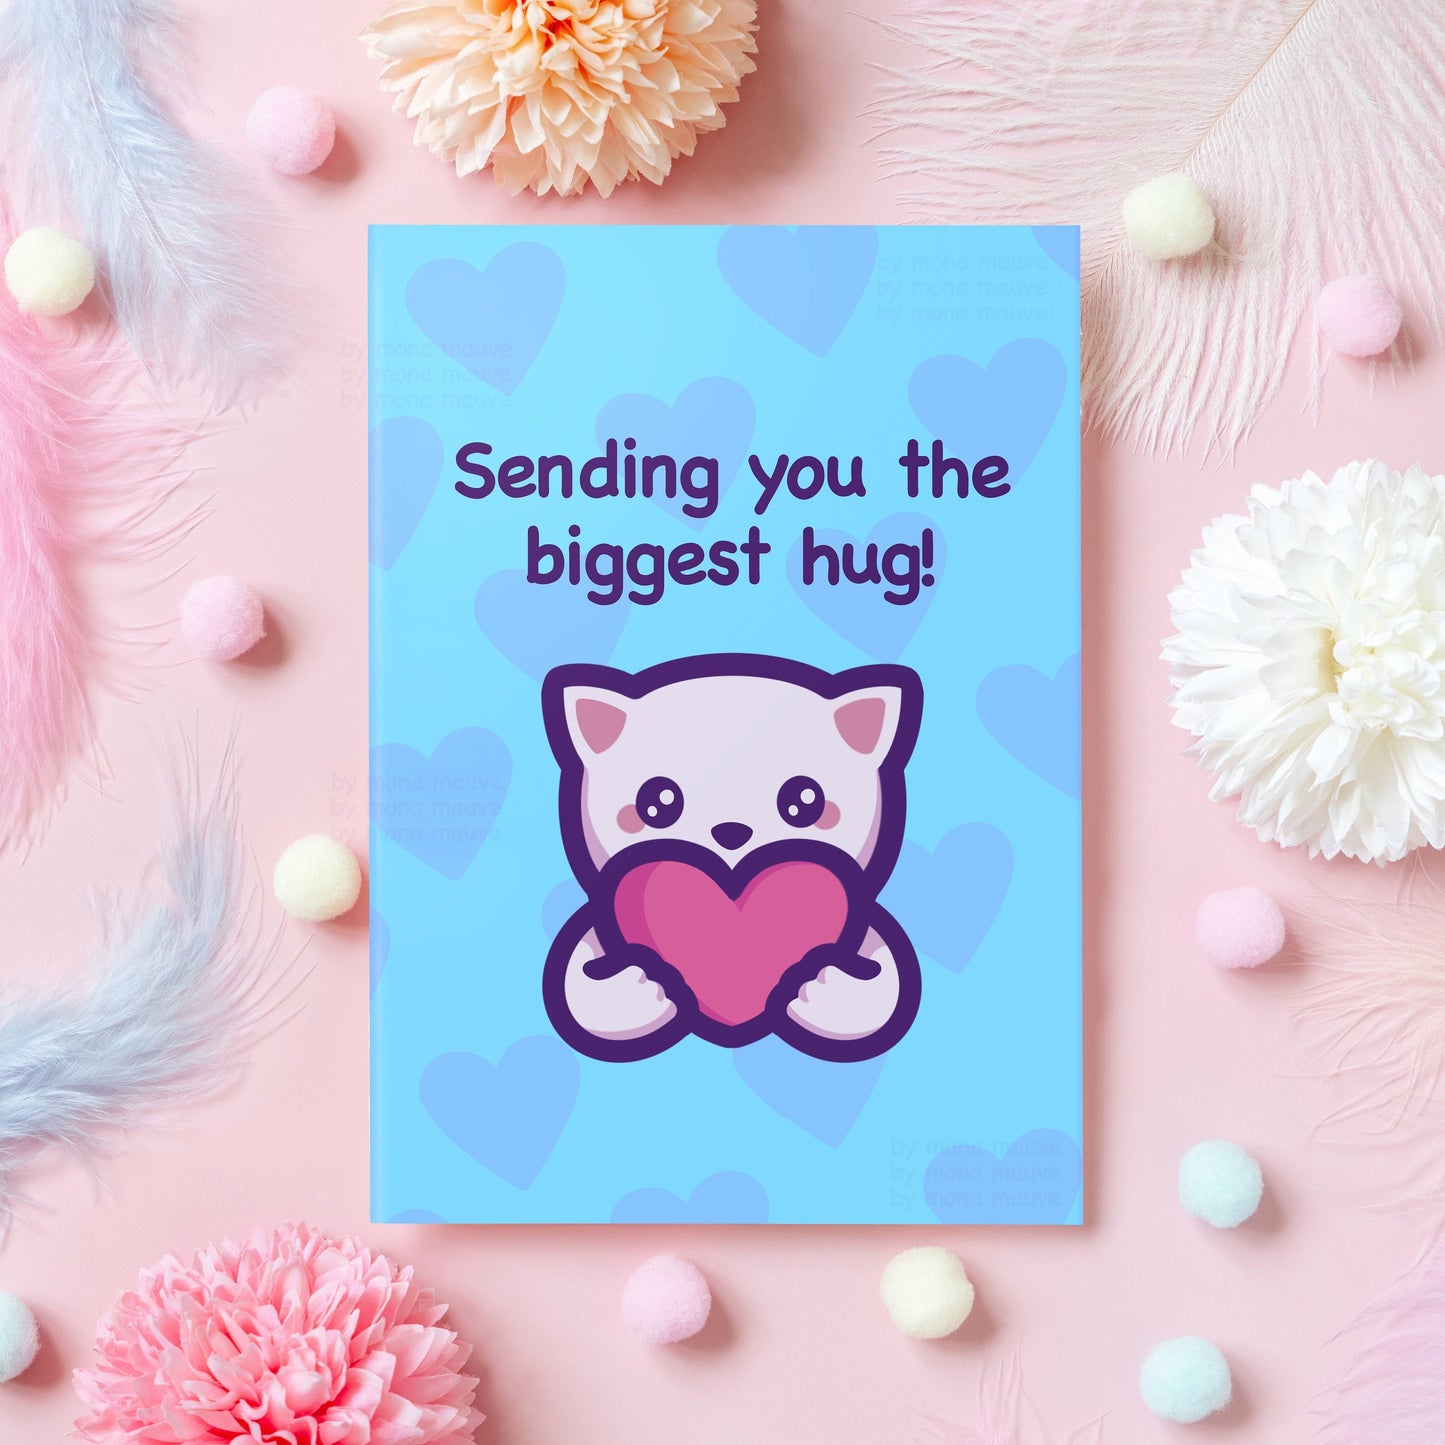 I Miss You Card | Sending You the Biggest Hug! | Send Directly | Birthday or Just Because Gift for Dad, Mom, Grandma, Grandpa - Her or Him